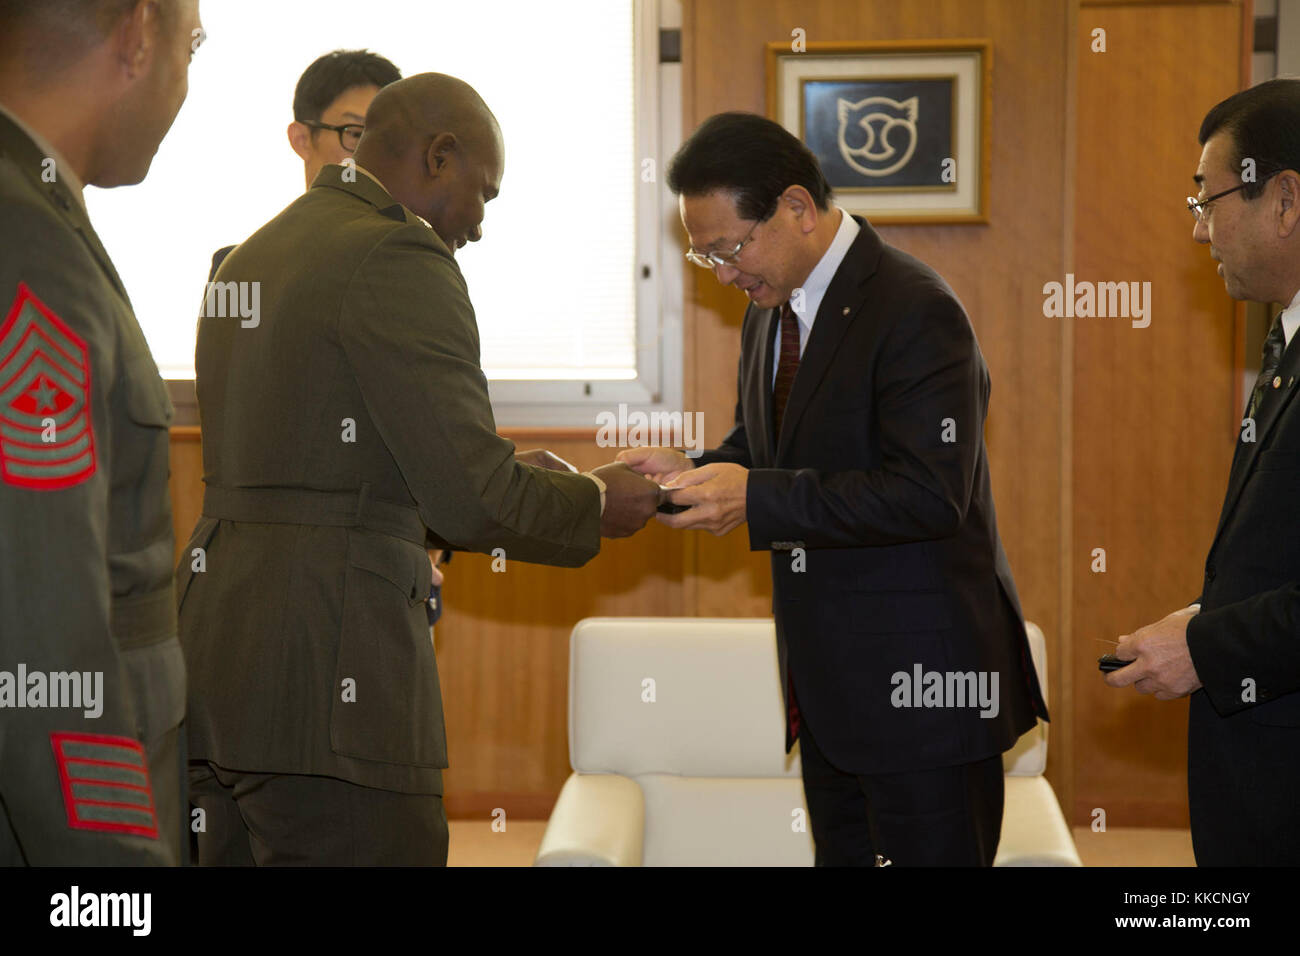 U.S. Marine Corps Lt. Col. Leroy Bryant Butler, battalion commander, 3rd Battalion, 12th Marine Regiment, meets with Mr. Kozo Sone, Mayor of Betsukai, during the Artillery Relocation Training Program (ARTP) 17-3 at Betsukai, Hokkaido, Japan on November 27, 2017. ARTP 17-3 is an annual training exercise that helps Marines to sustain and improve occupational and common skills through simulated real world training scenarios, enhancing their combat operational readiness and improving international relationships through the U.S.-Japan Treaty of Mutual Cooperation and Security.   (U.S. Marine Corps  Stock Photo